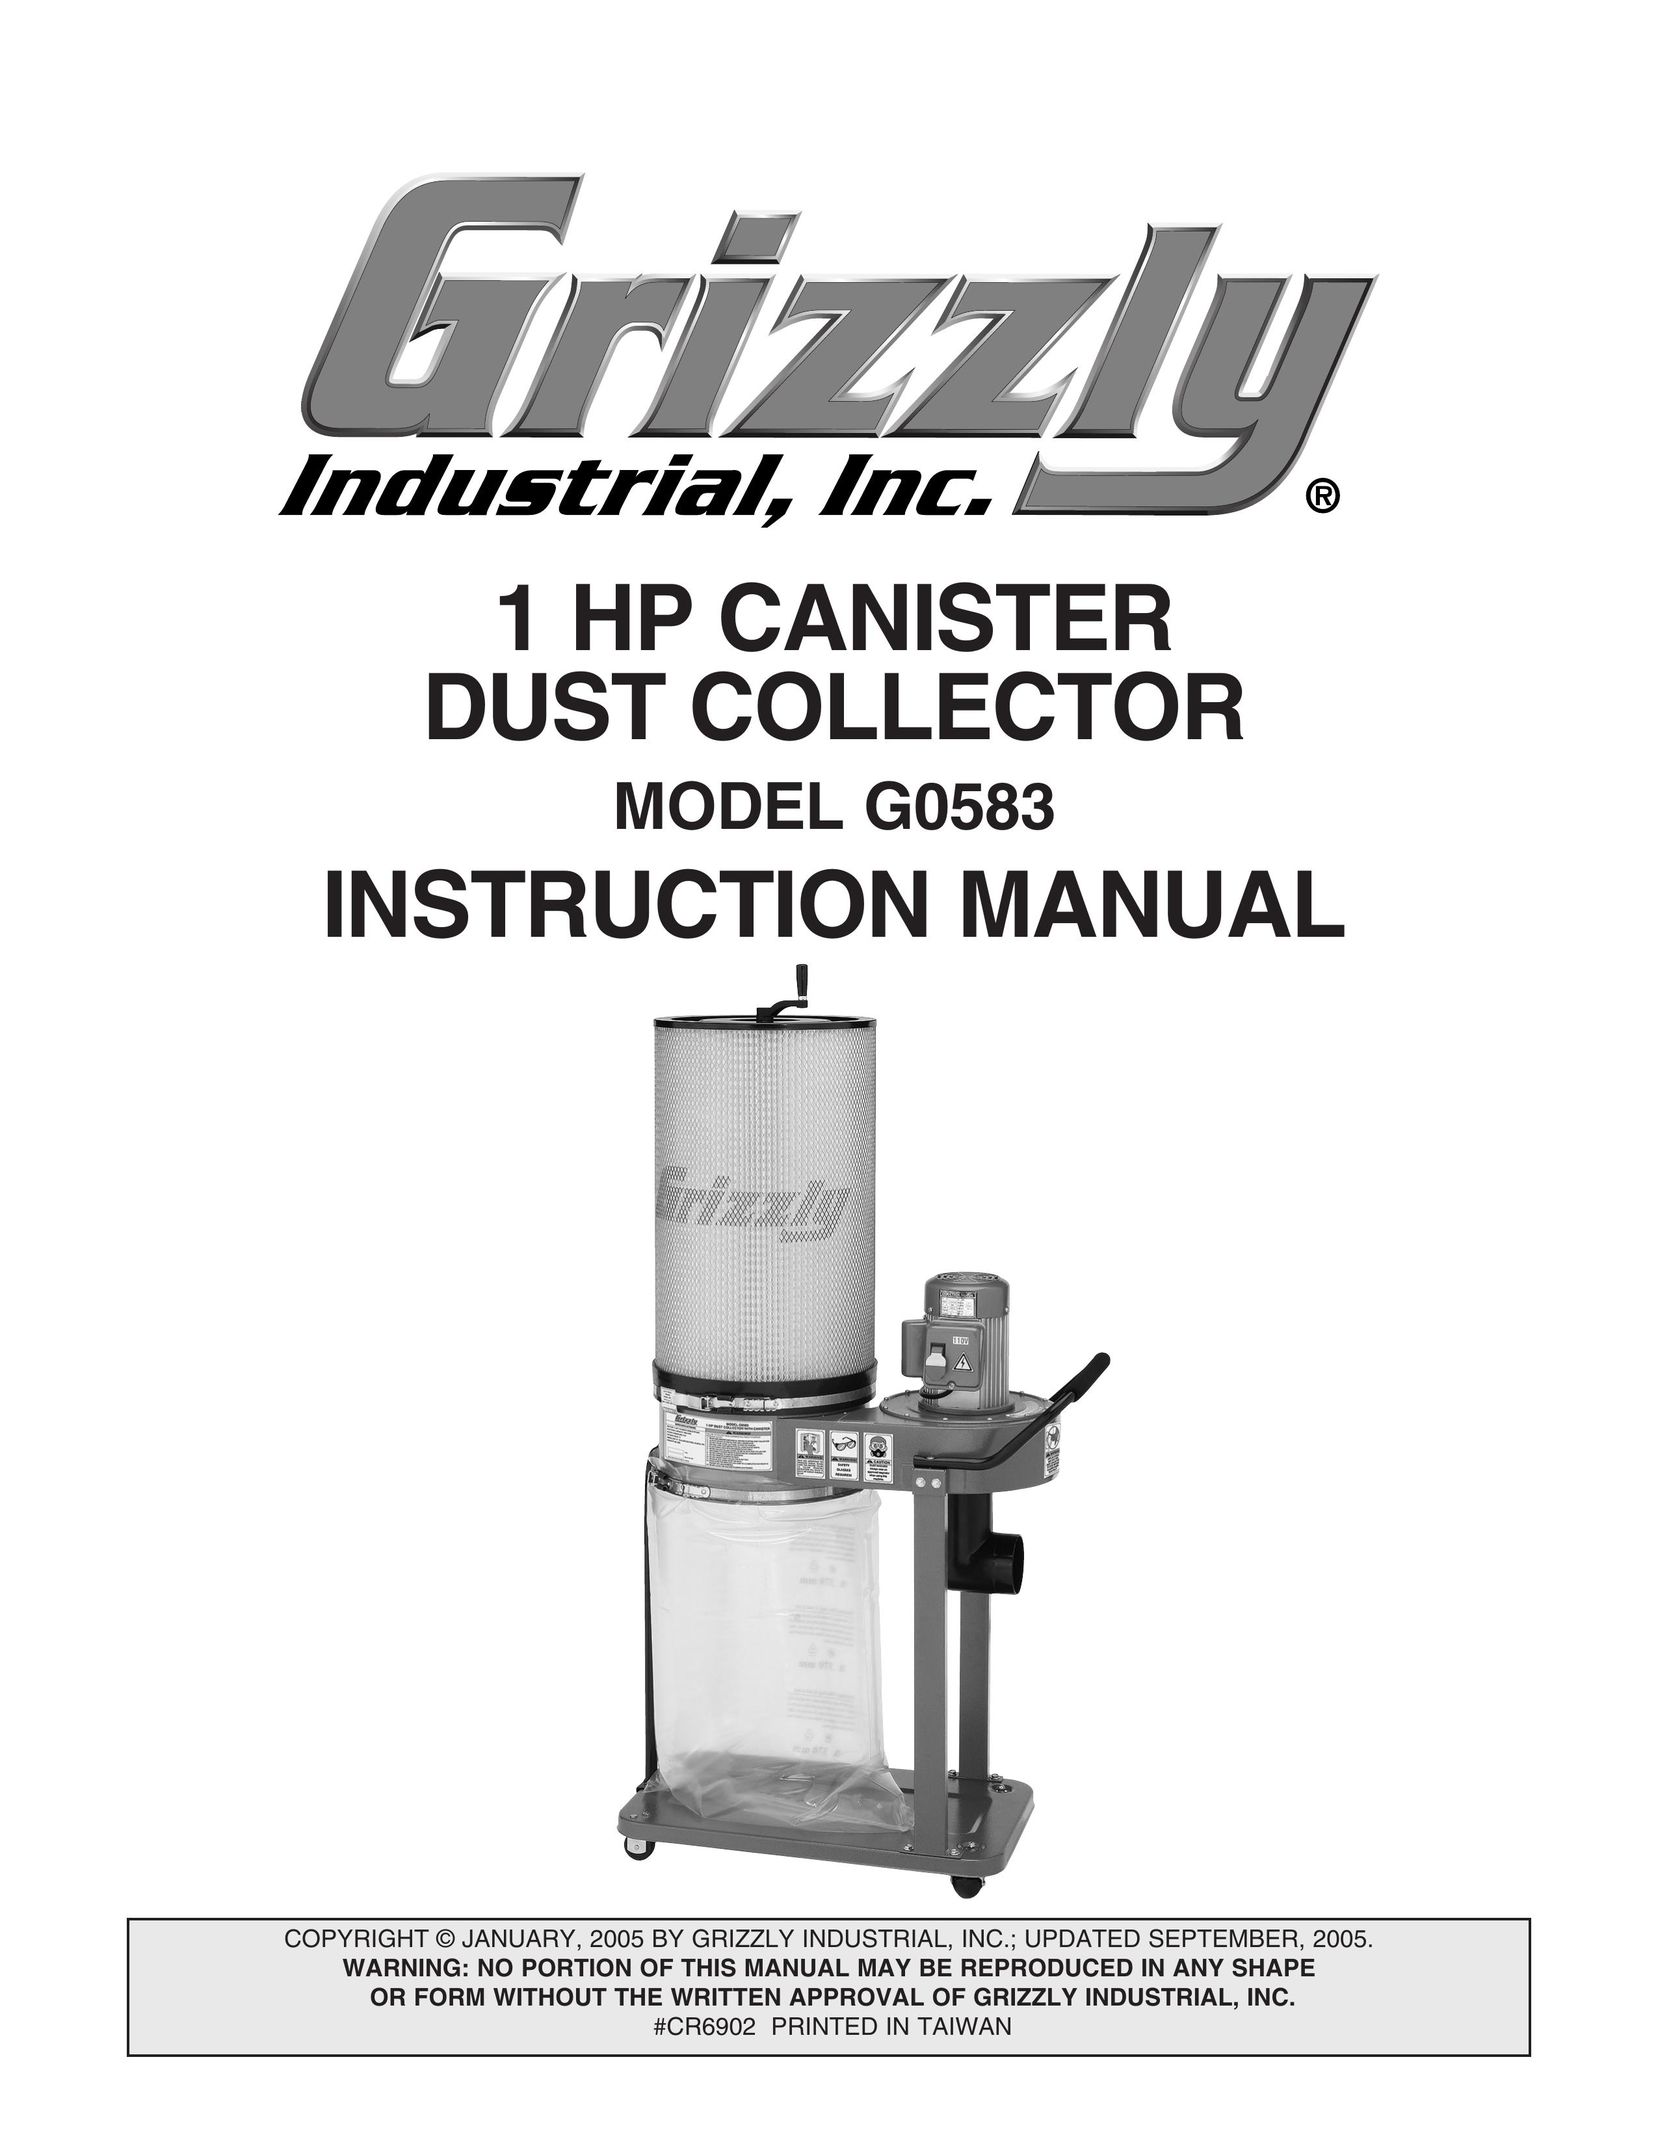 Grizzly G0583 Dust Collector User Manual